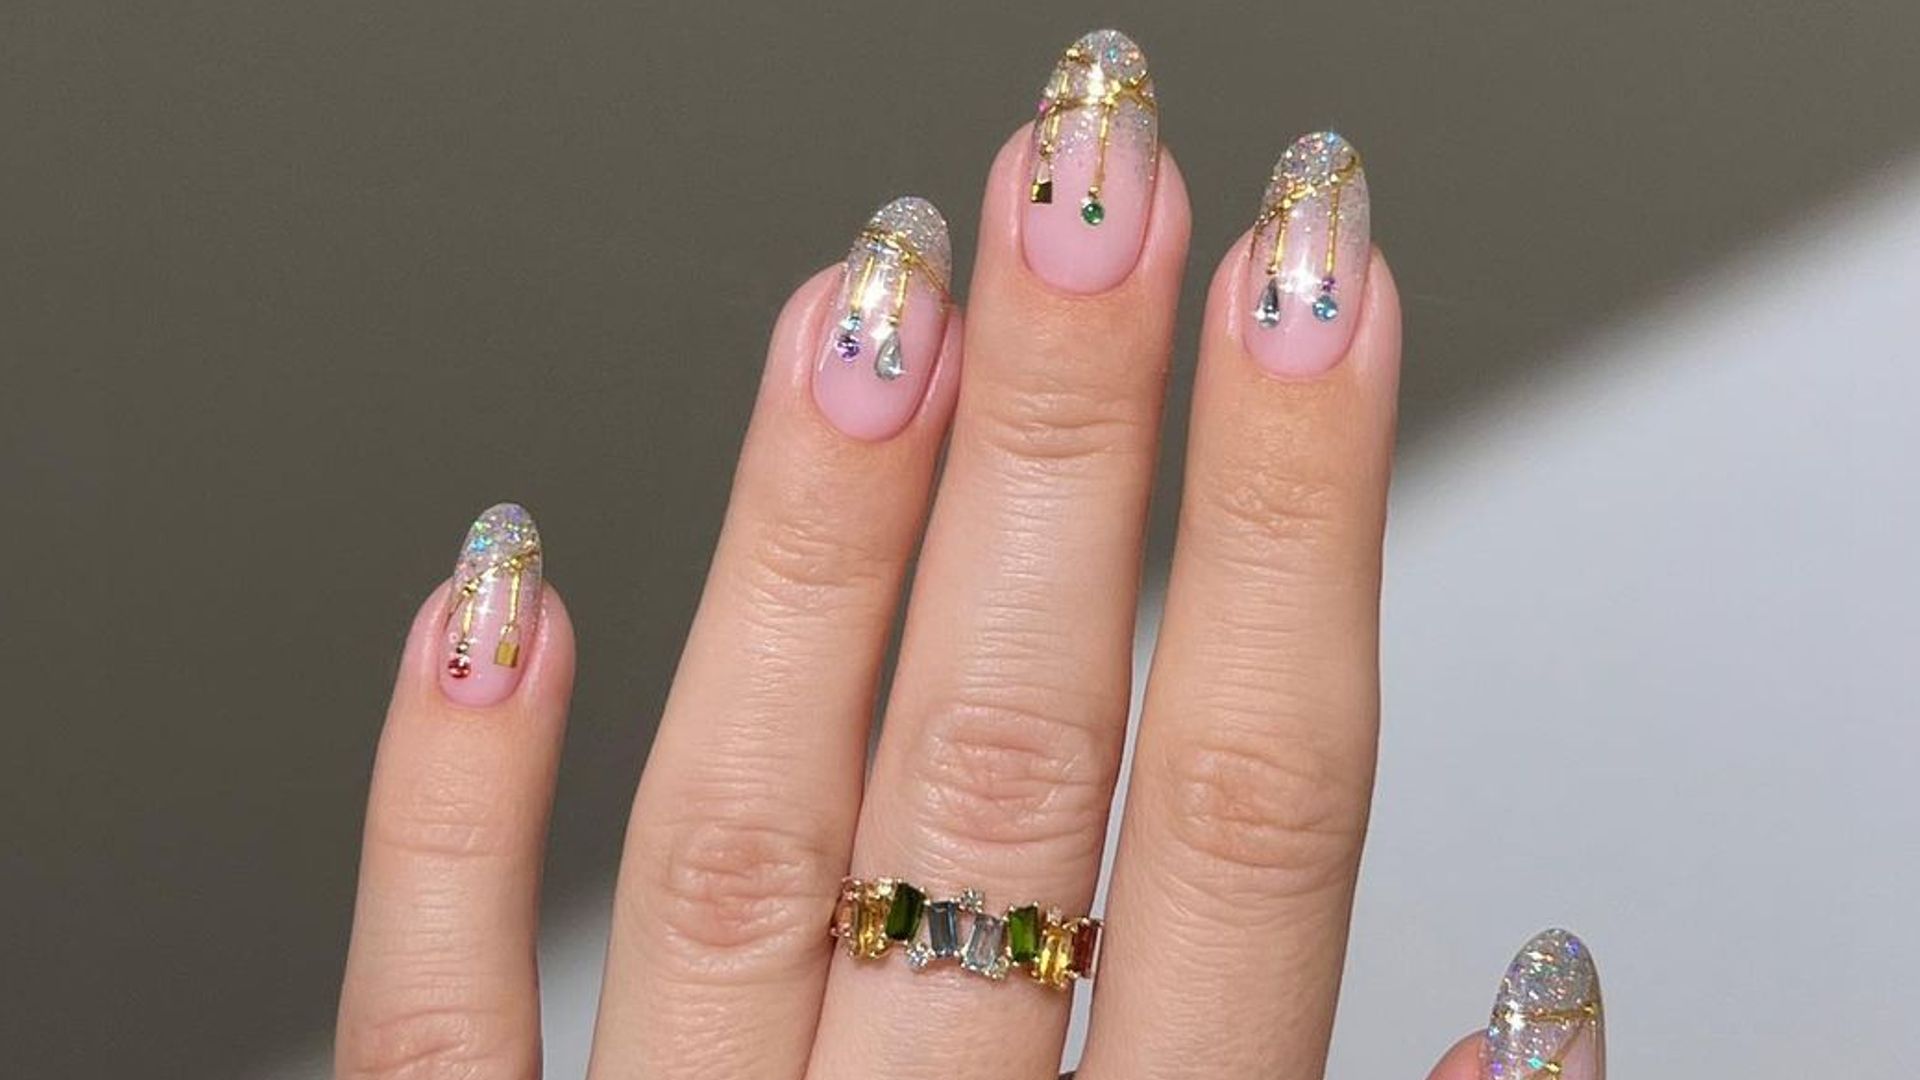 Colorful Christmas Nails Winter Nail Designs With Glitter,rhinestones, On  Short And Long Female Nails. Stock Photo, Picture and Royalty Free Image.  Image 115146543.